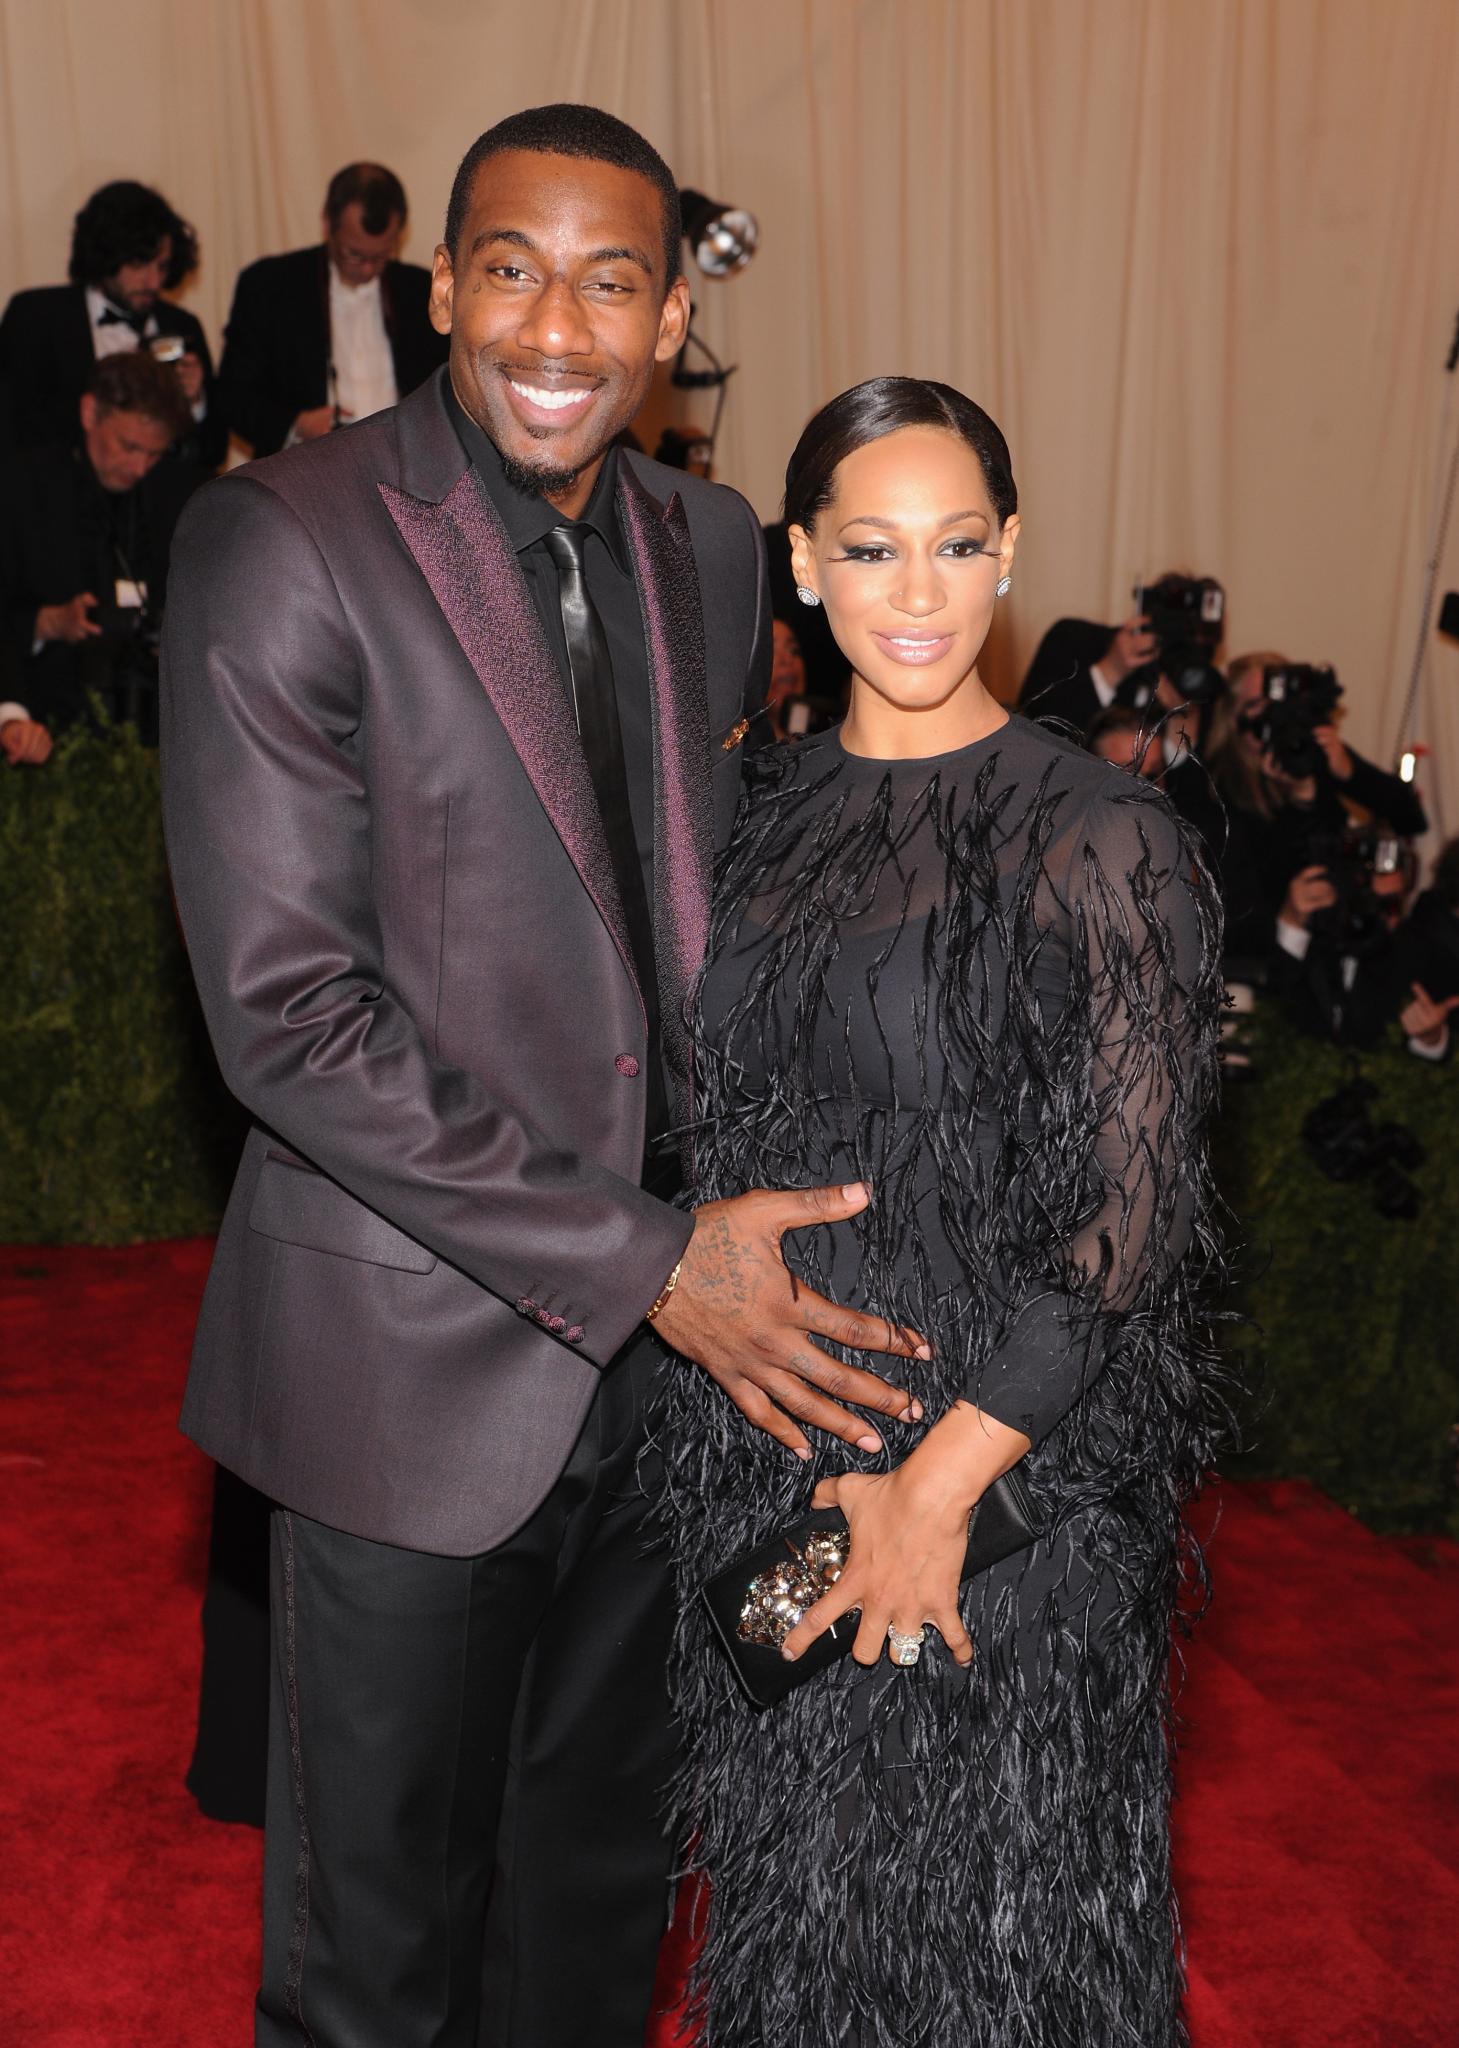 Amar'e Stoudemire and Wife Reveal Baby Name